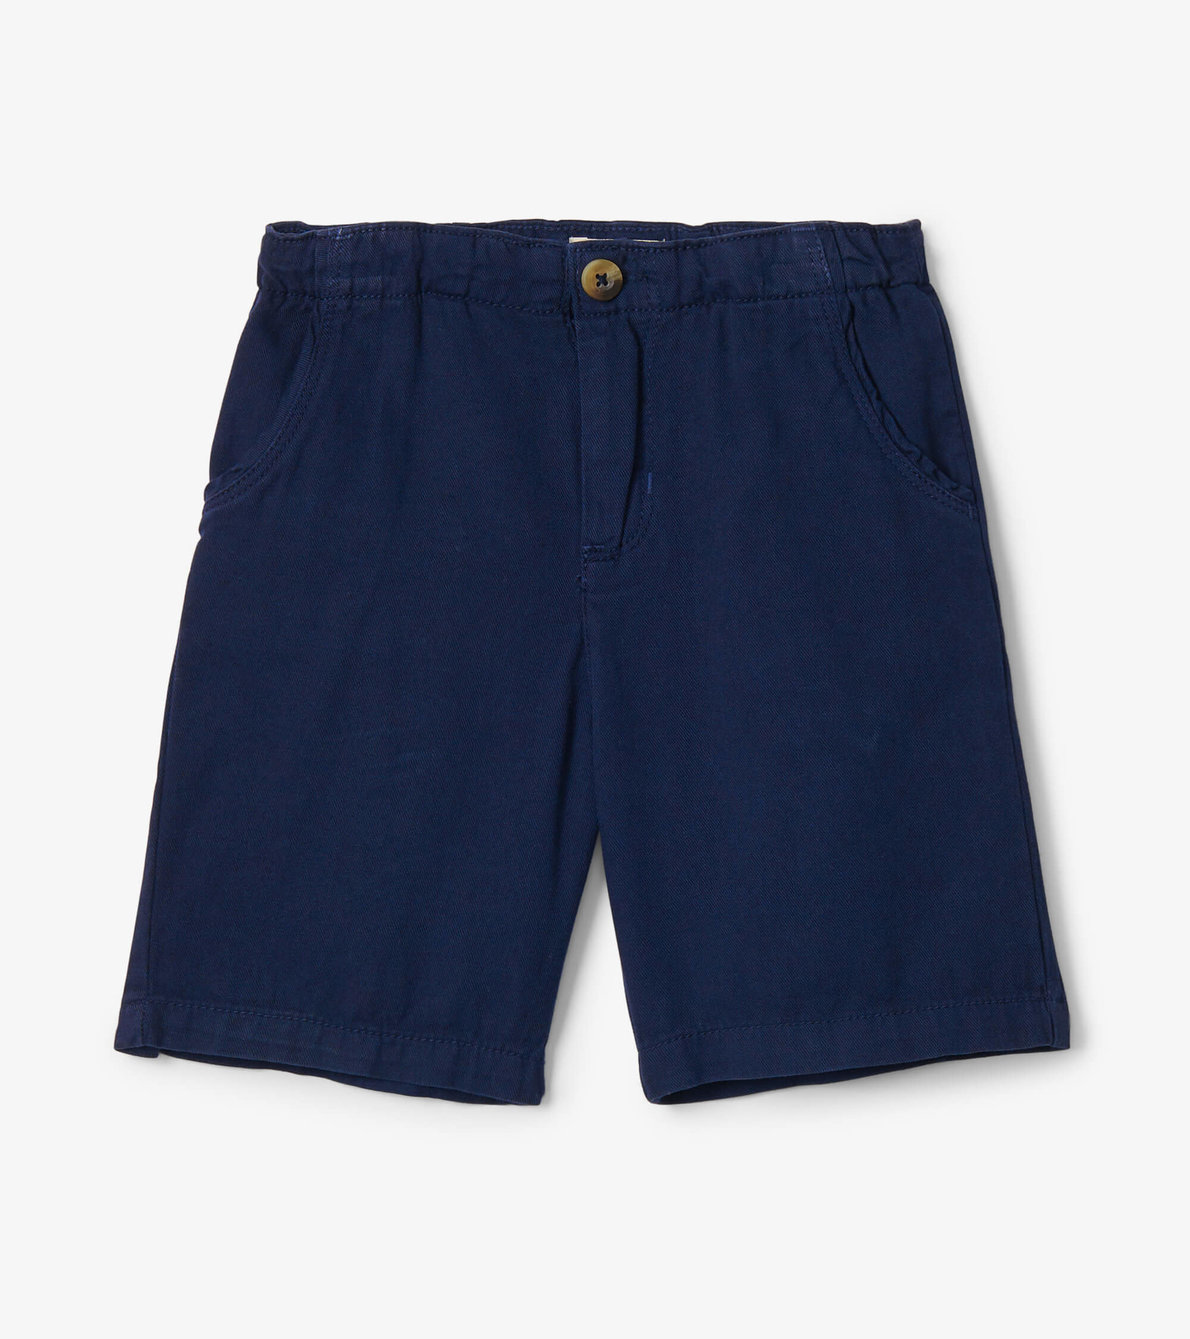 View larger image of Boys Navy Twill Twill Shorts